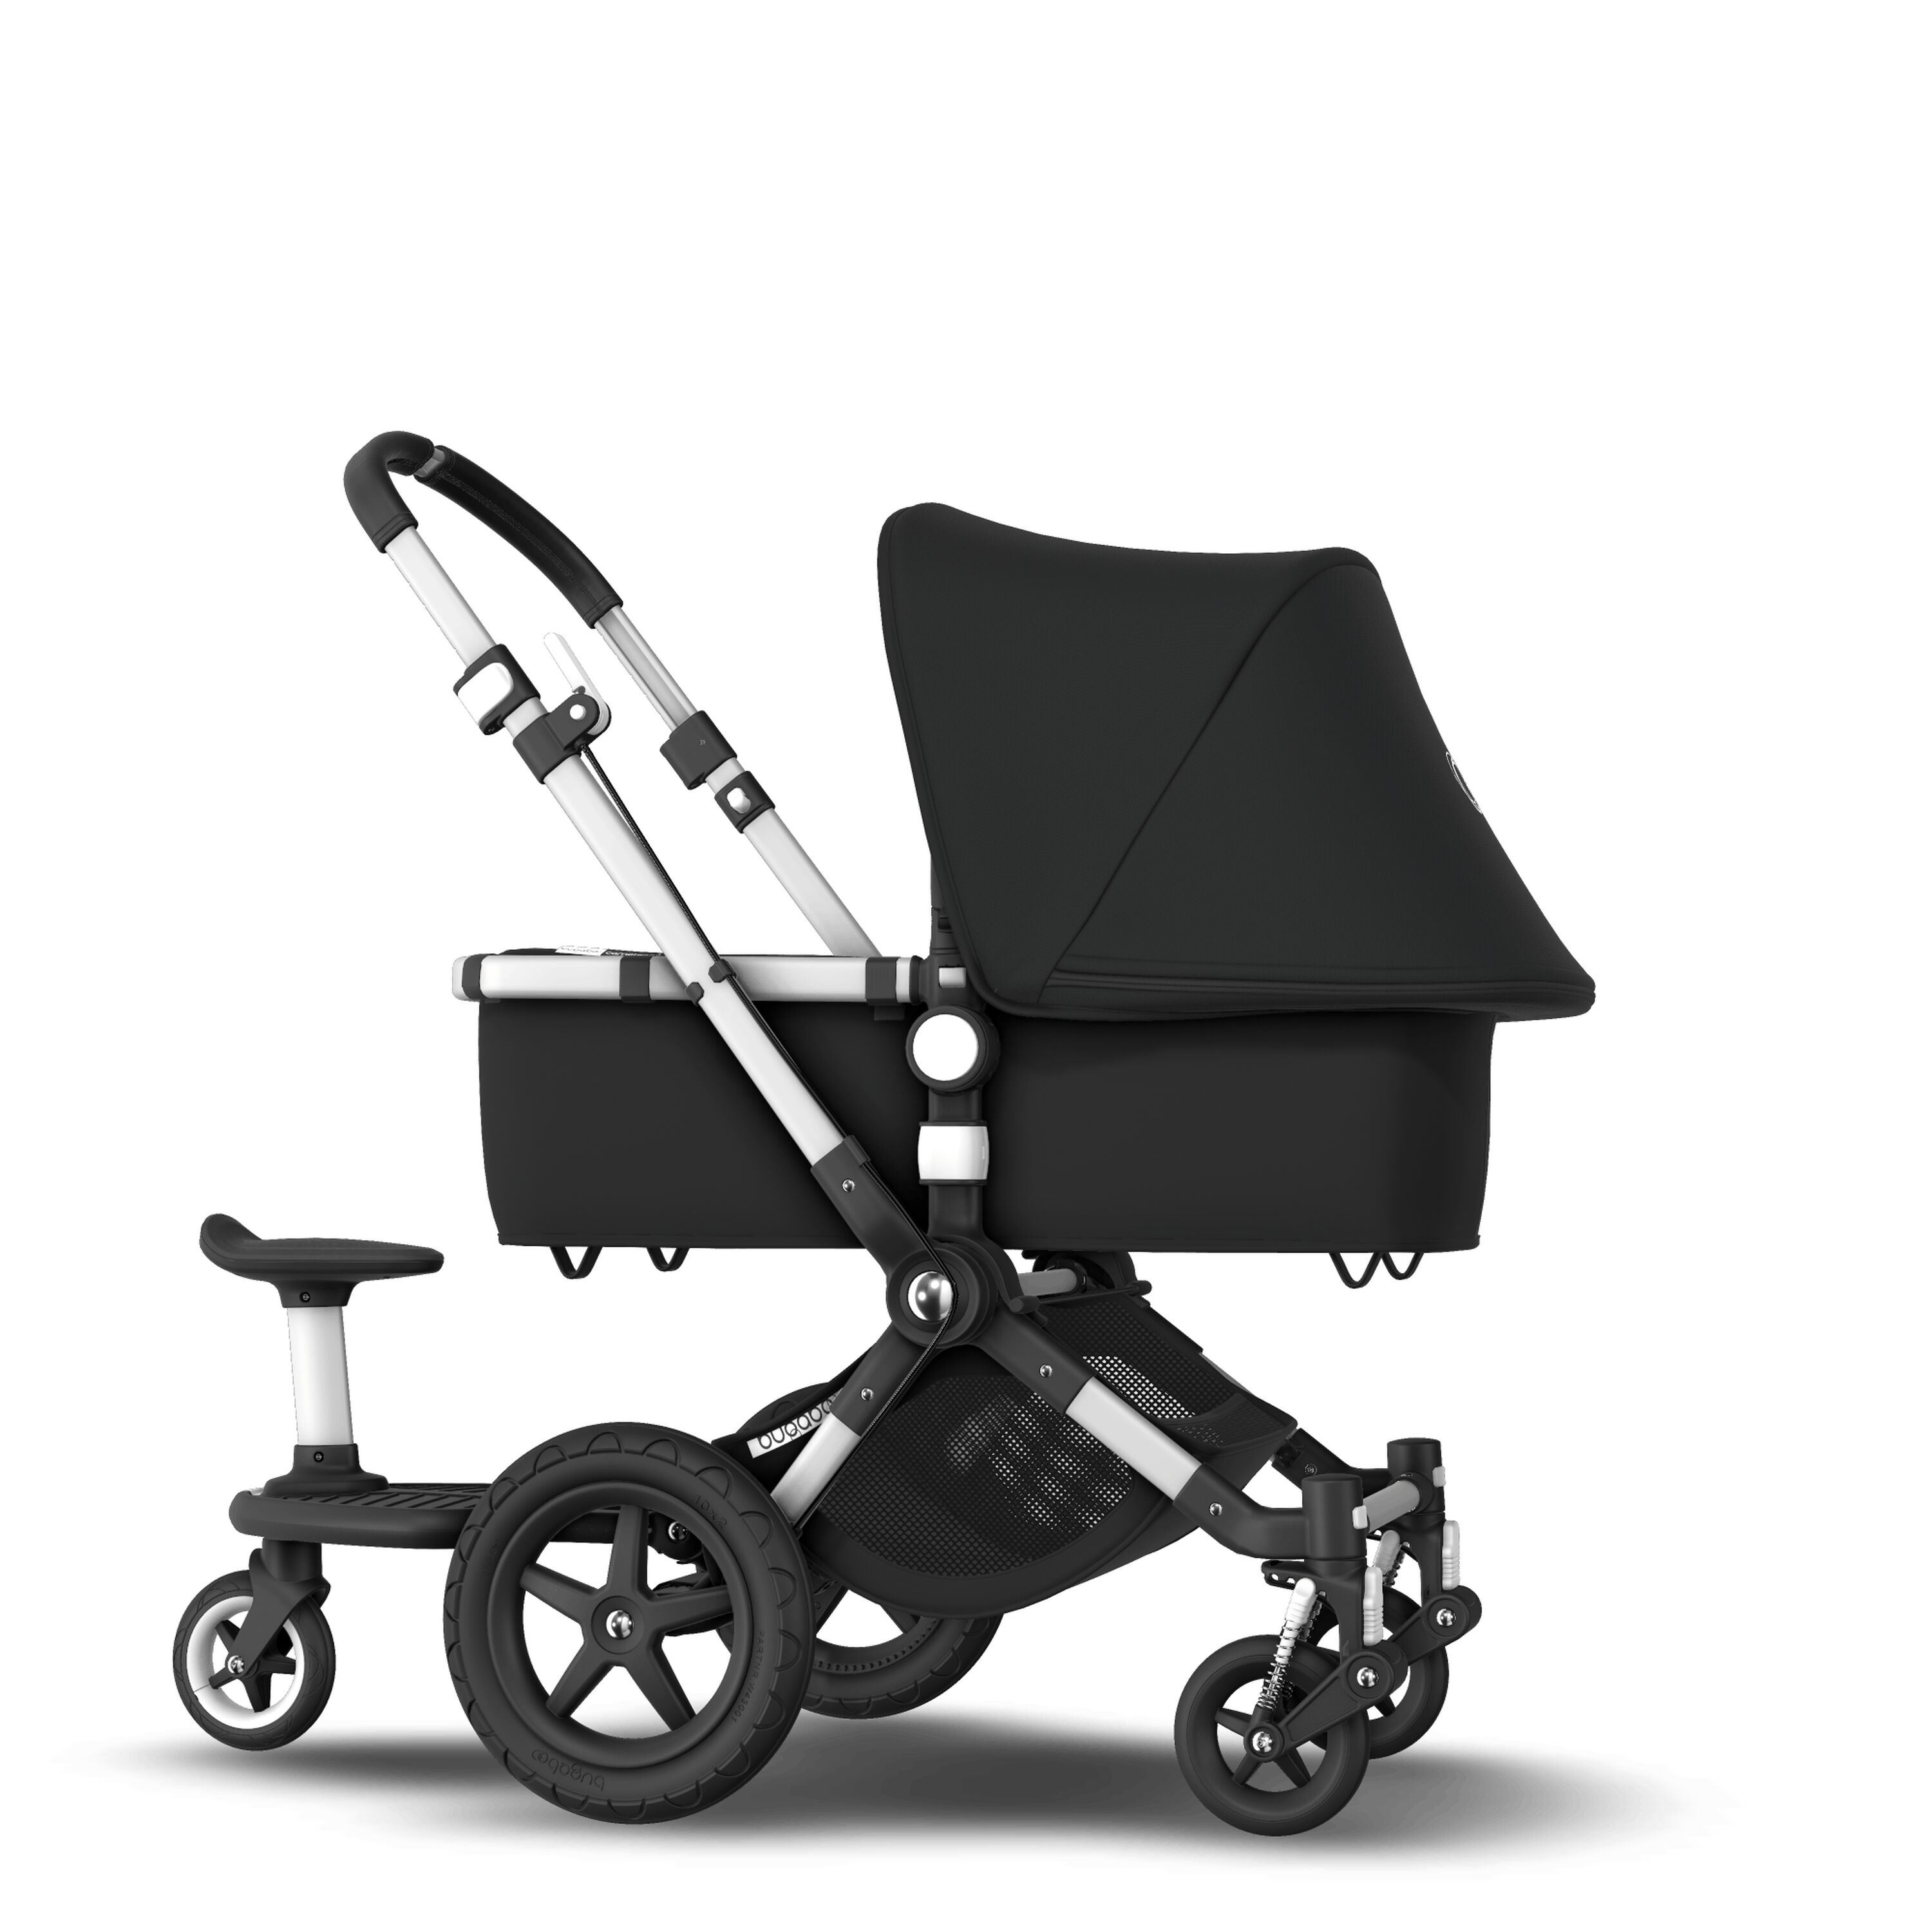 Cameleon 3 Plus Sit and stand stroller Black sun canopy, black fabrics, aluminum chassis | Bugaboo